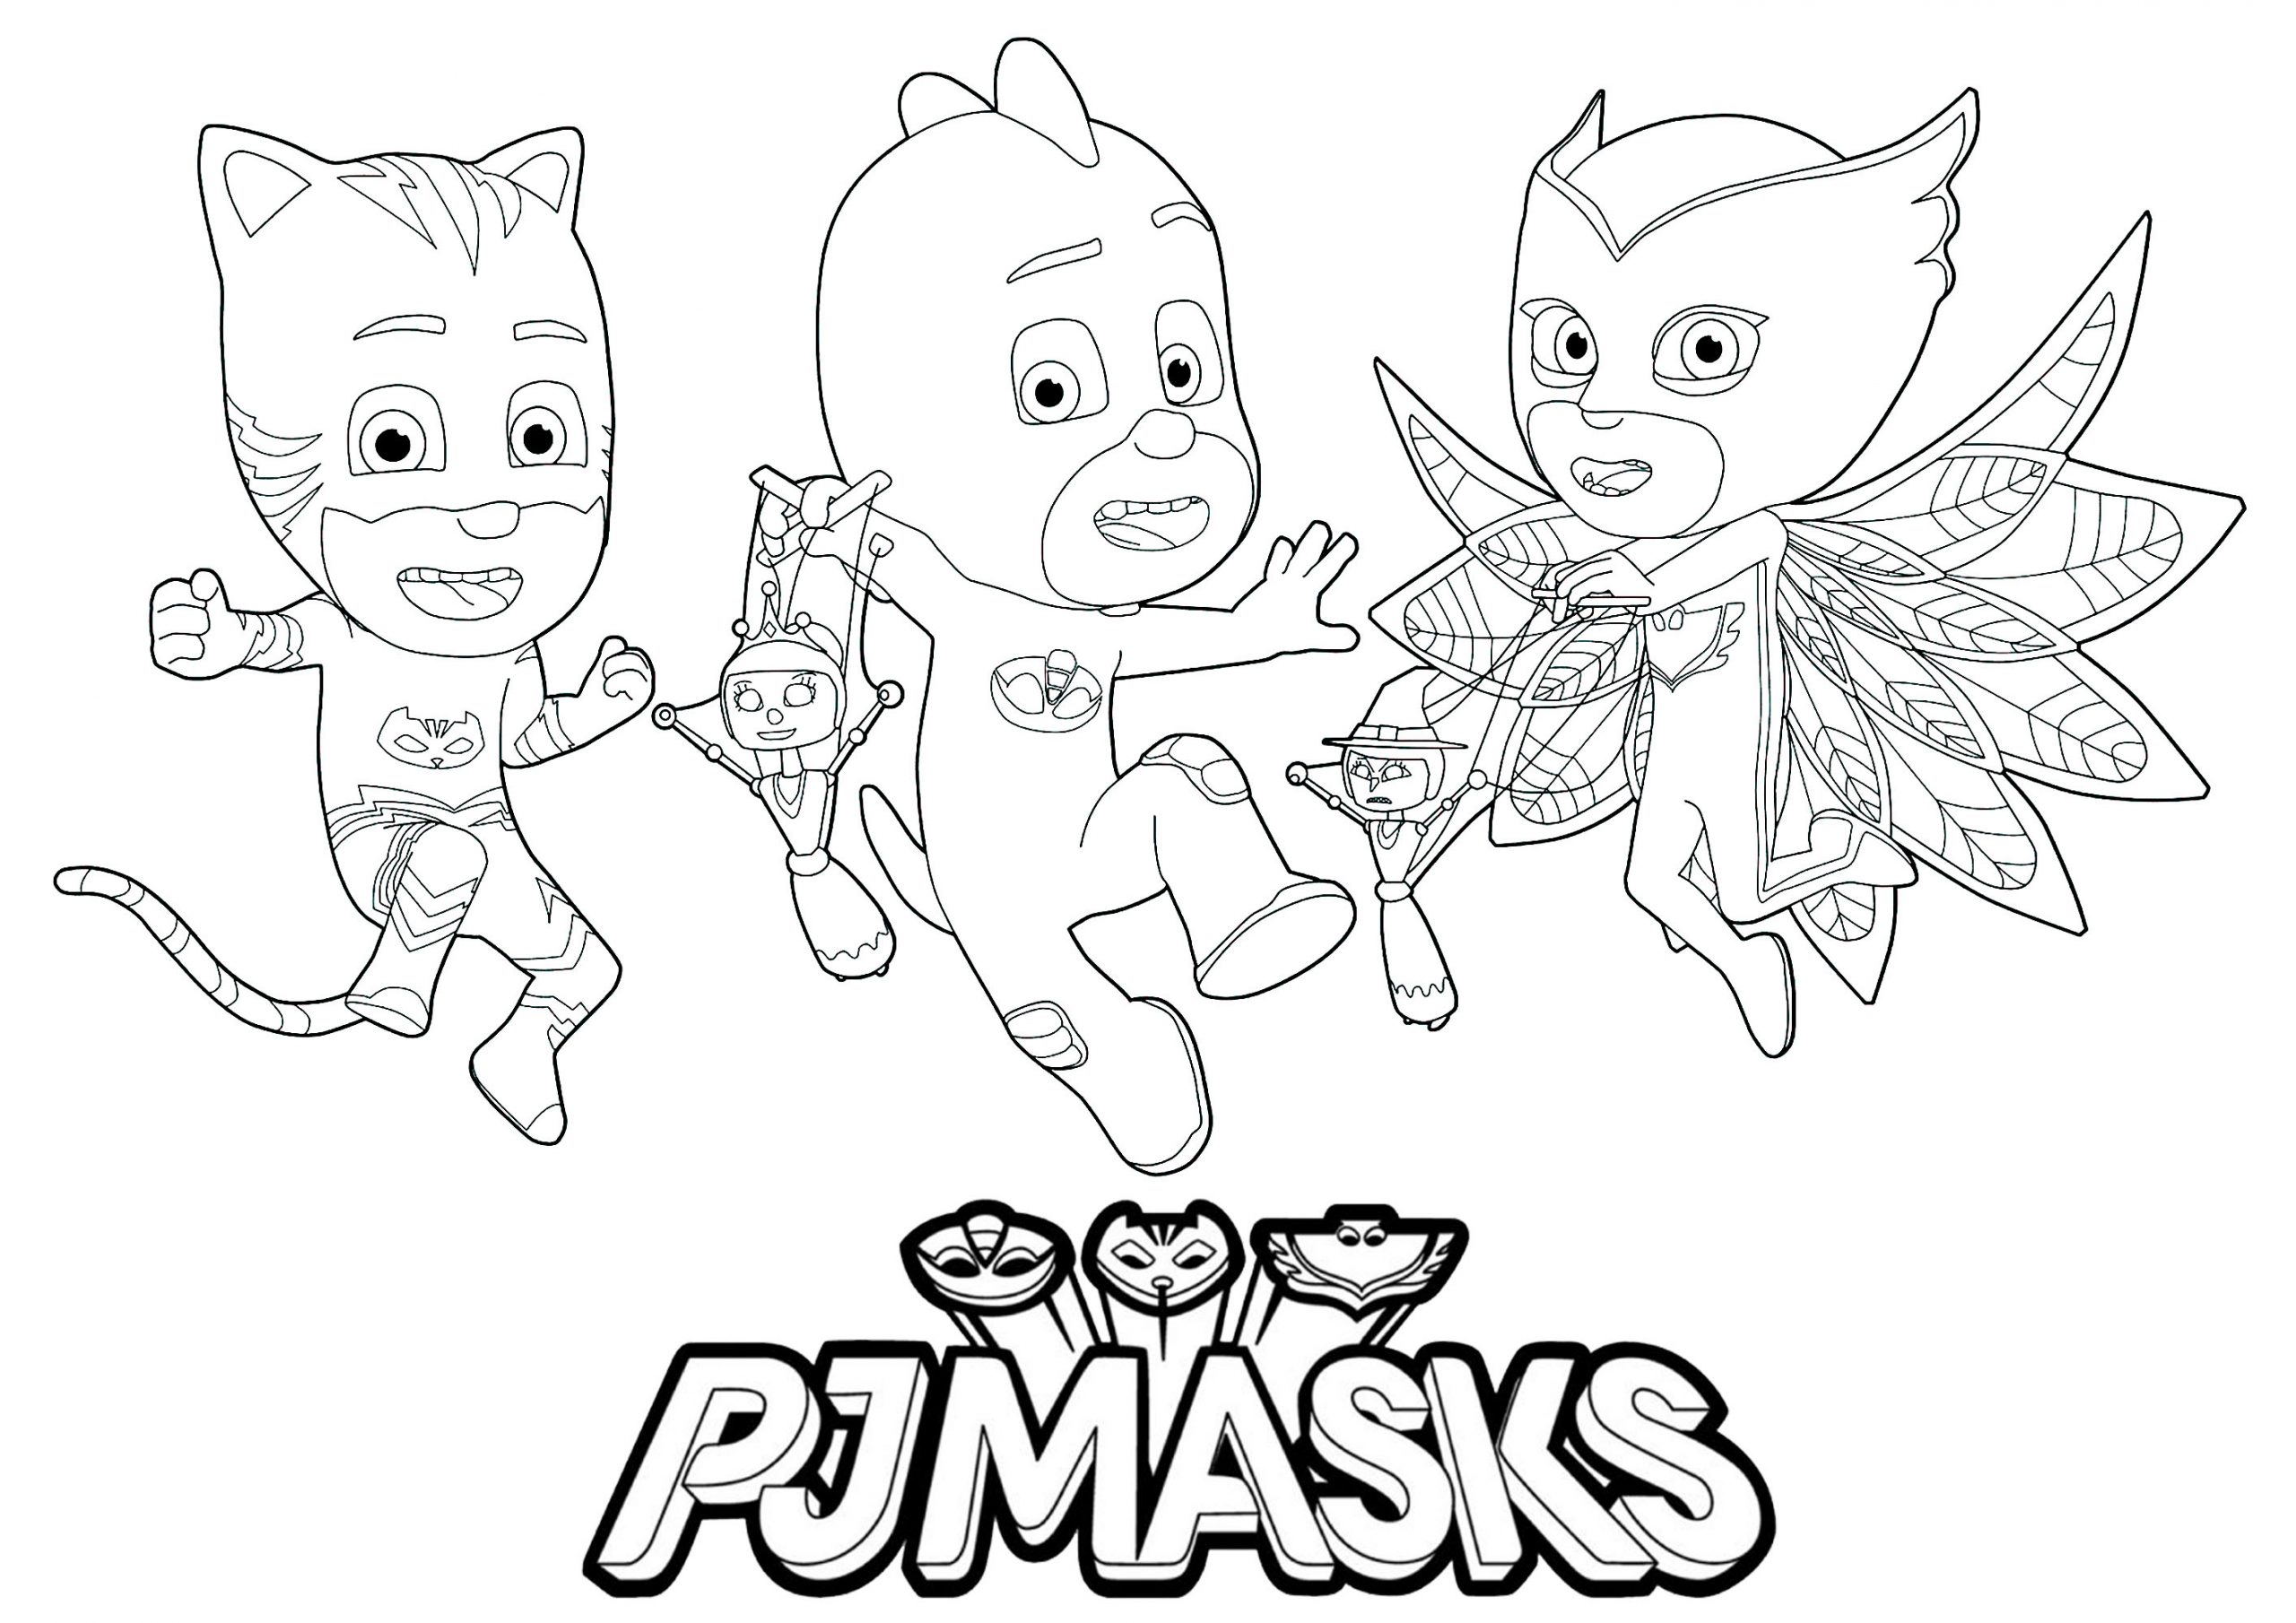 Catboy Coloring Pages - Coloring Home